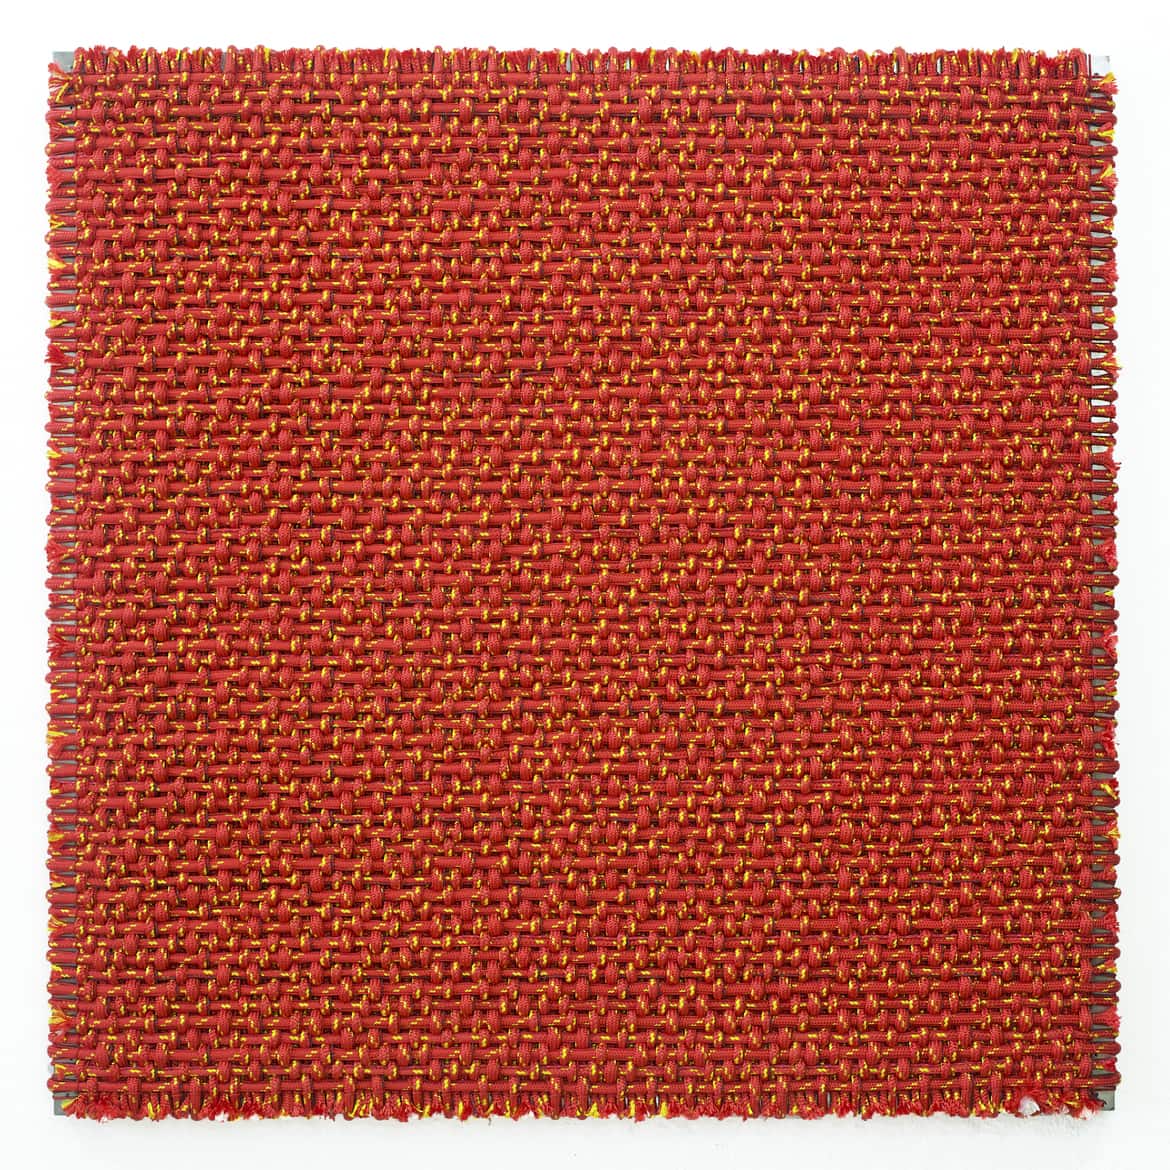 'Composition in Pink and Red', 2018, polyester and aluminium, 172 x 172 x 8cm